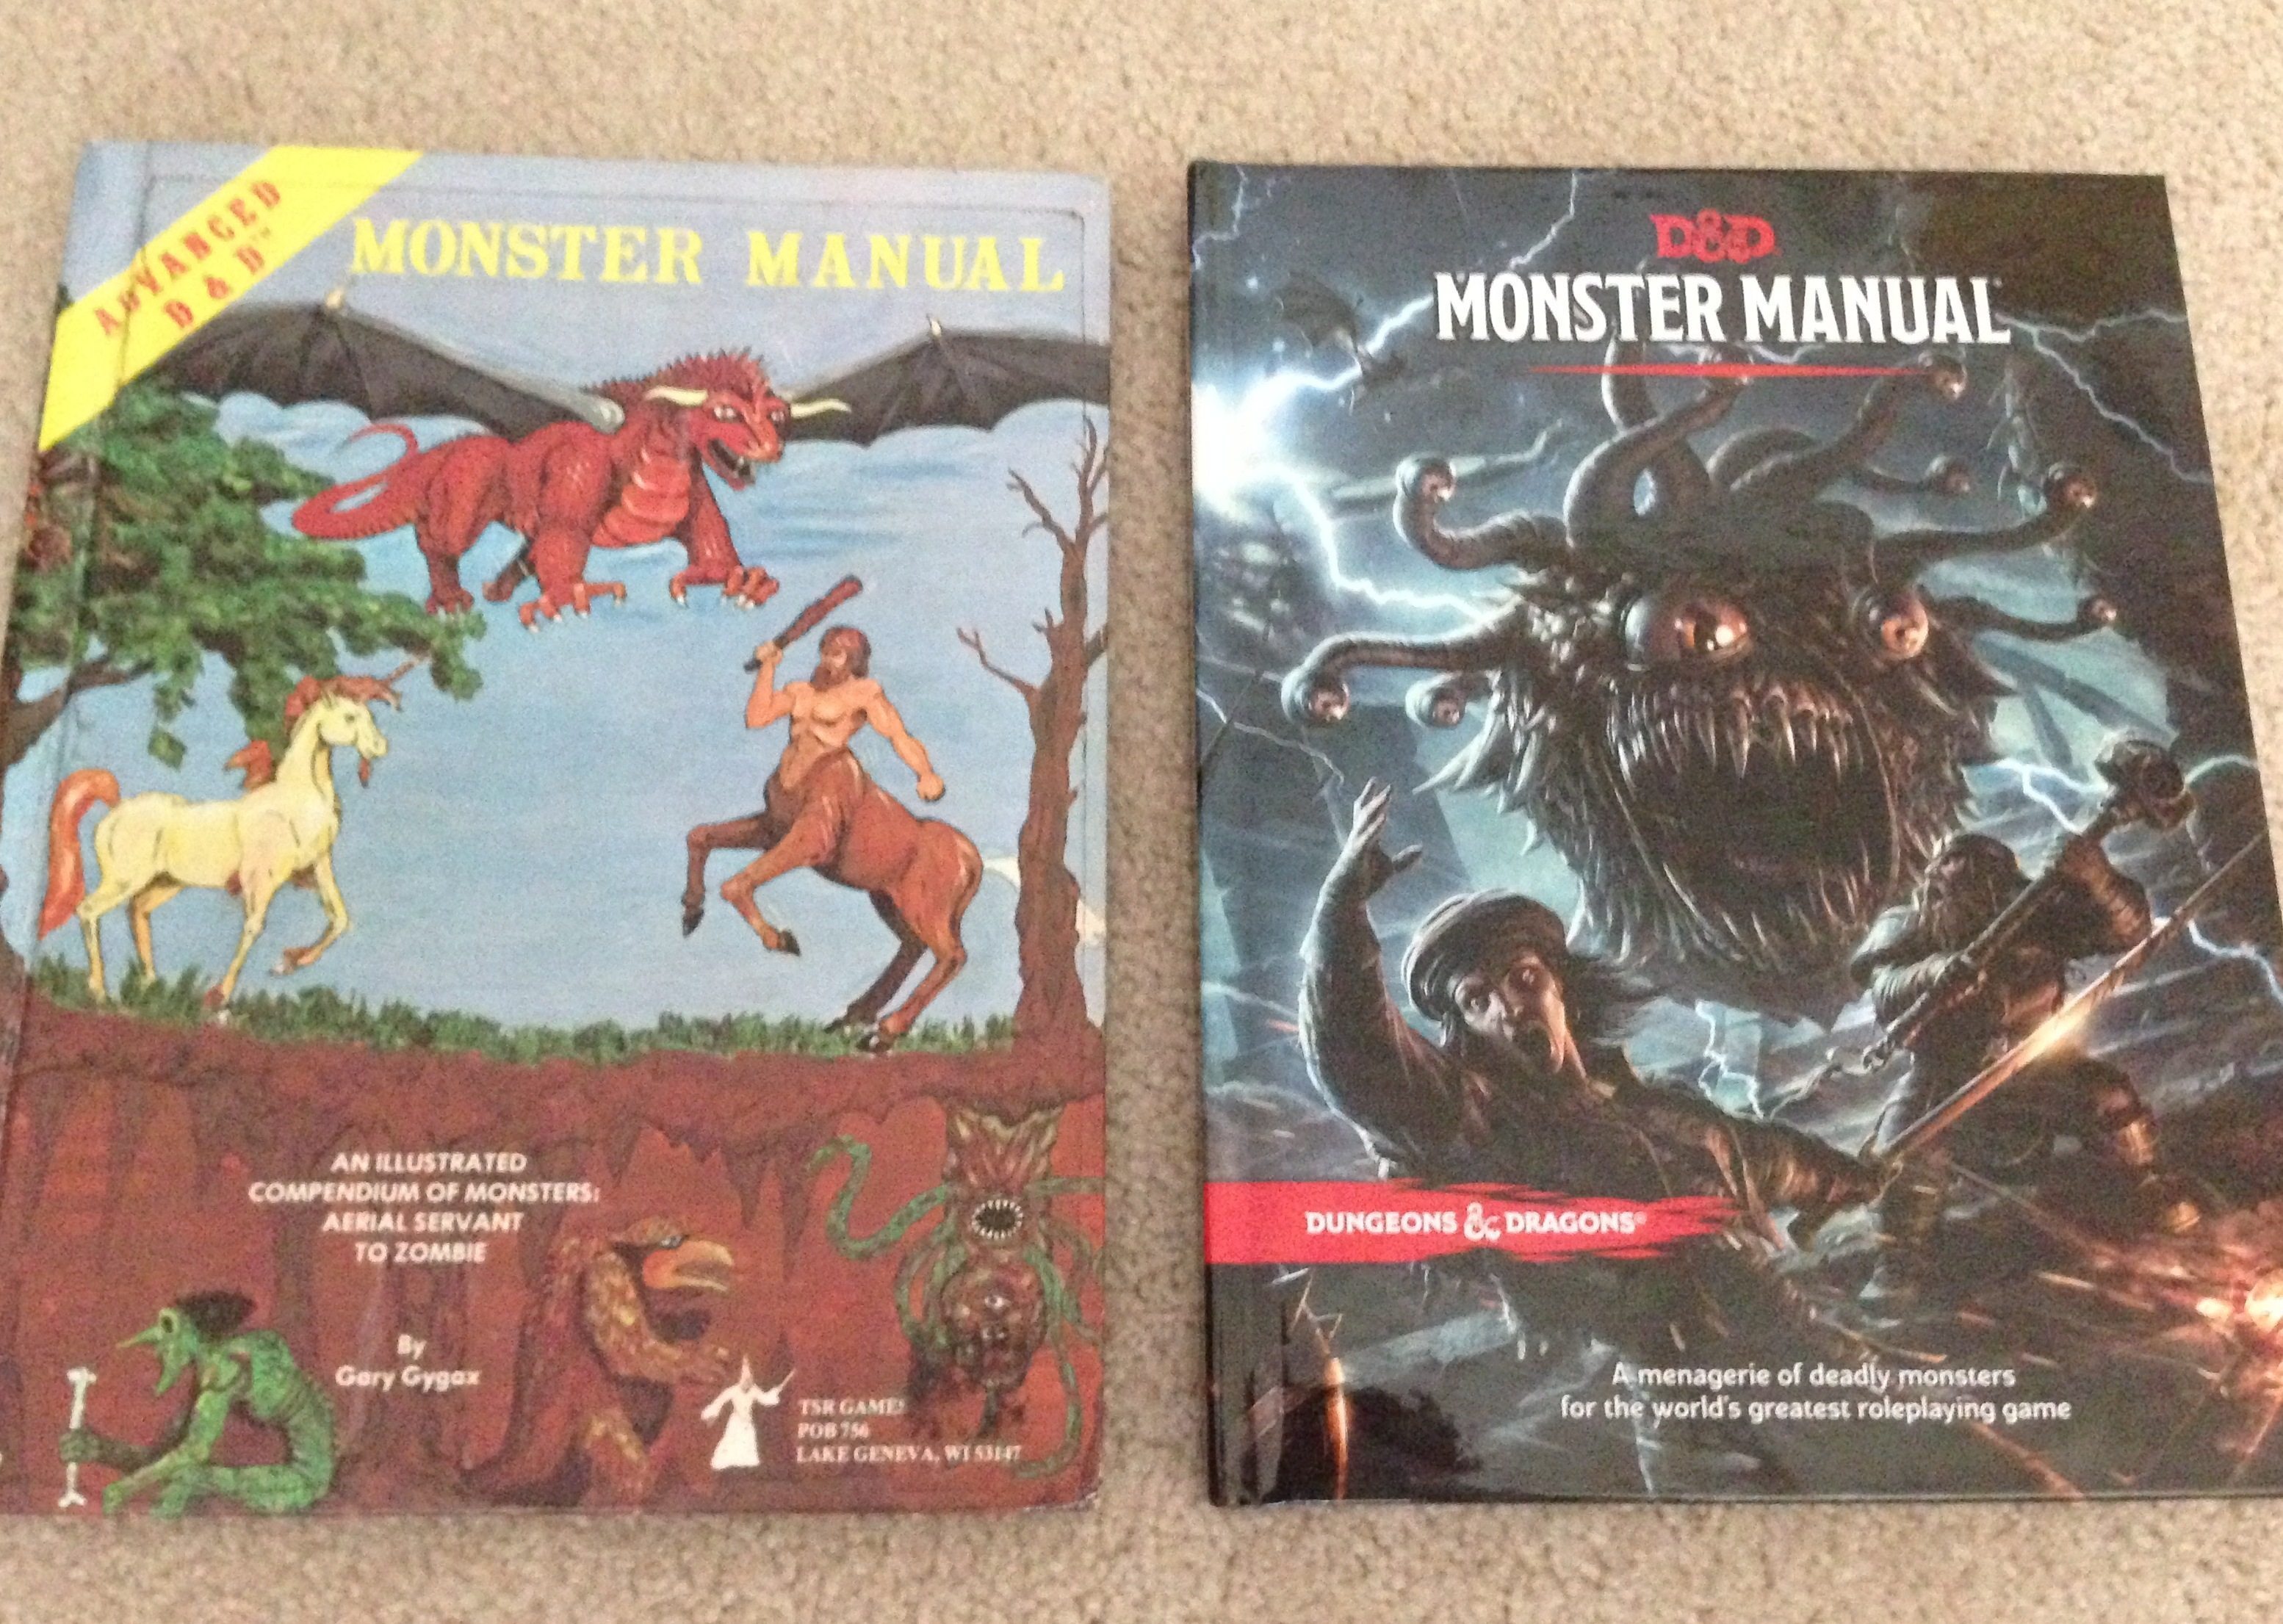 Buy dmg and monster manual together